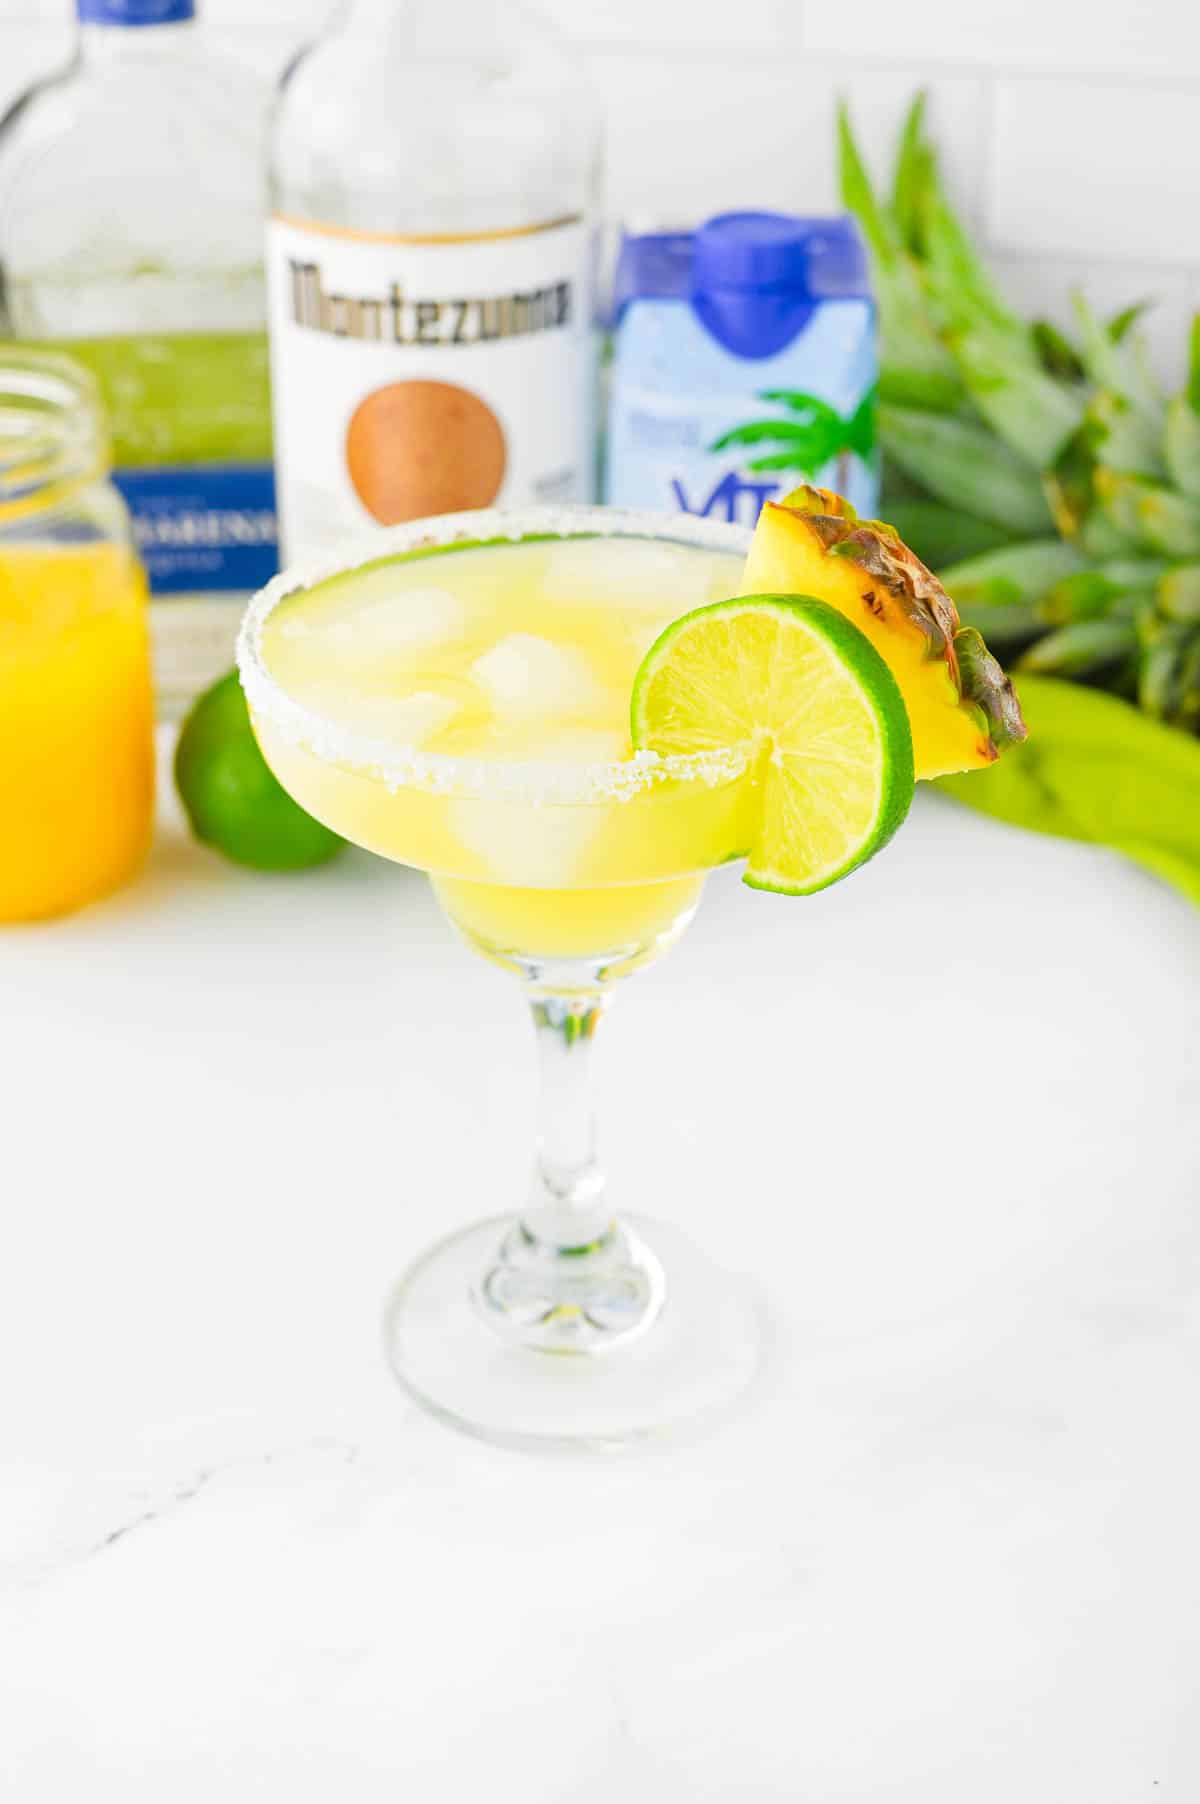 Yellow colored beverage in a margarita glass with pineapple and lime wheel on salted rim and other ingredients in background.